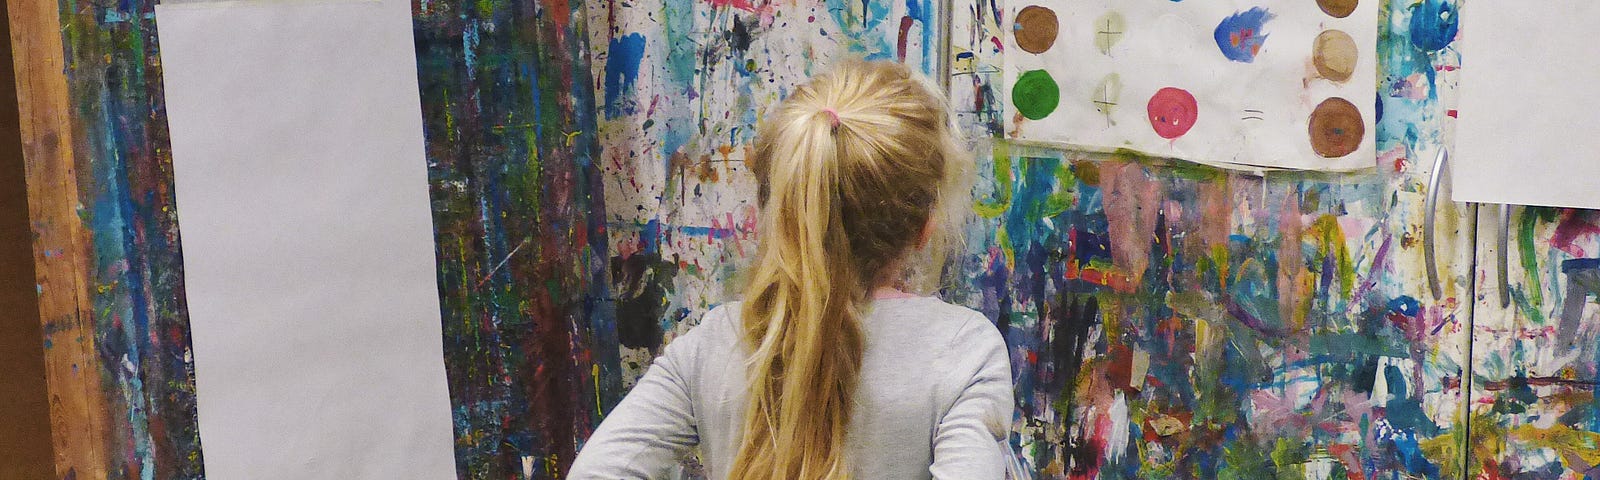 A young girl looking at a painted wall.